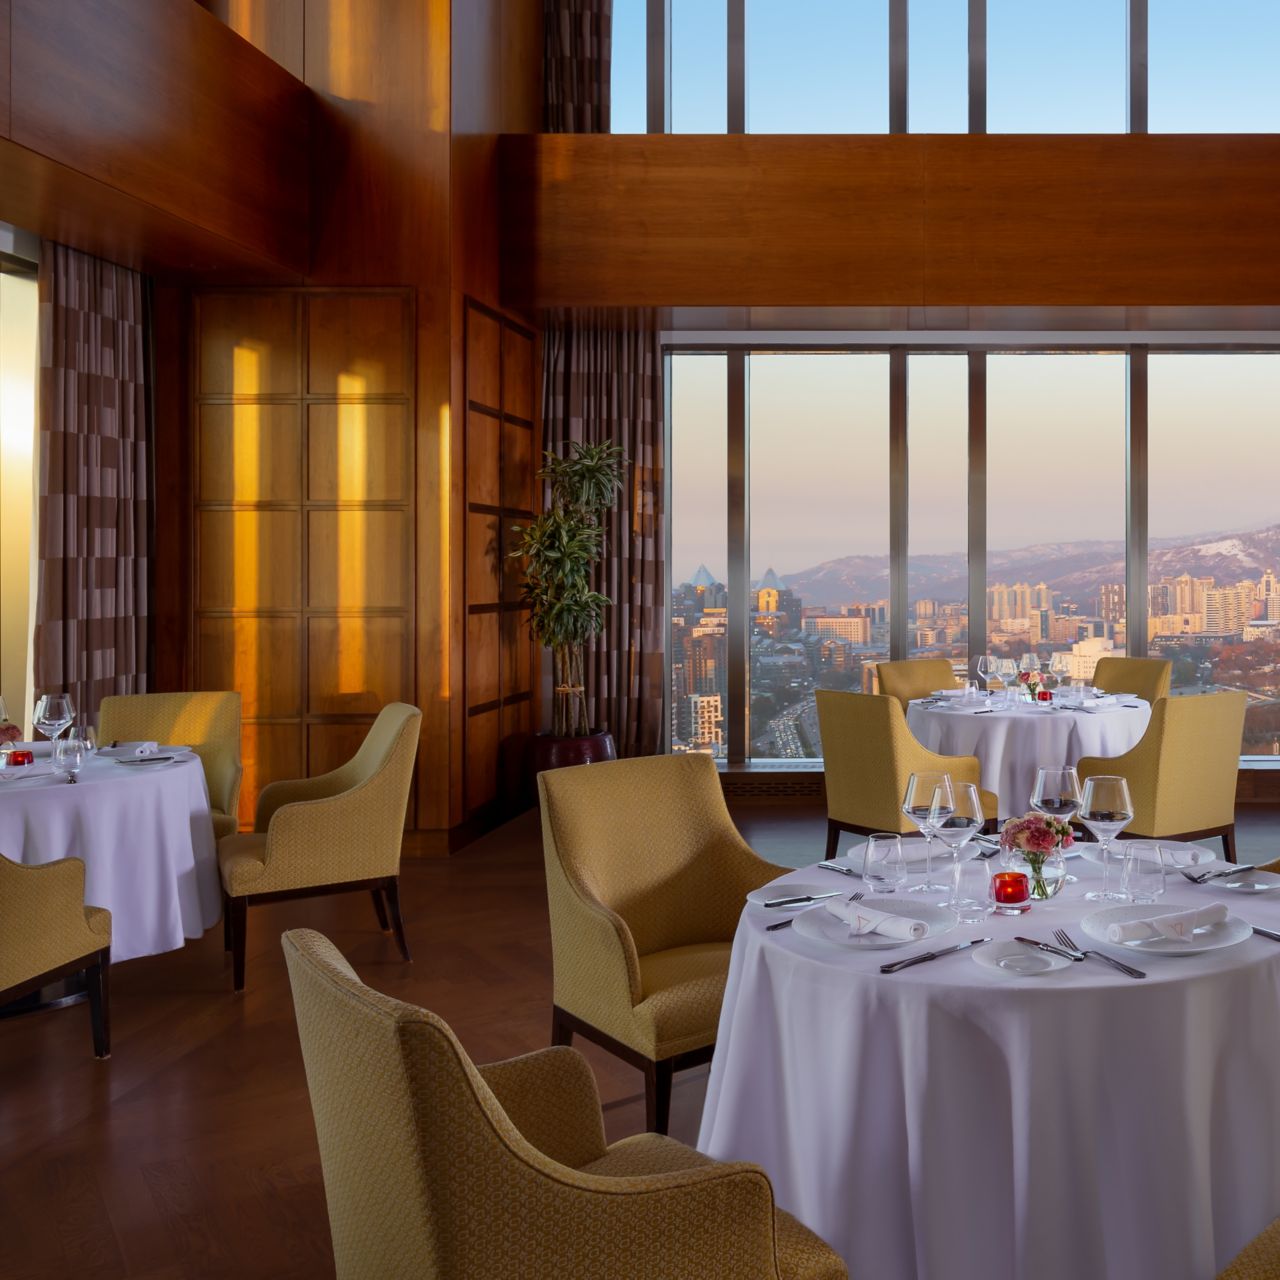 A restaurant with a view towards the city